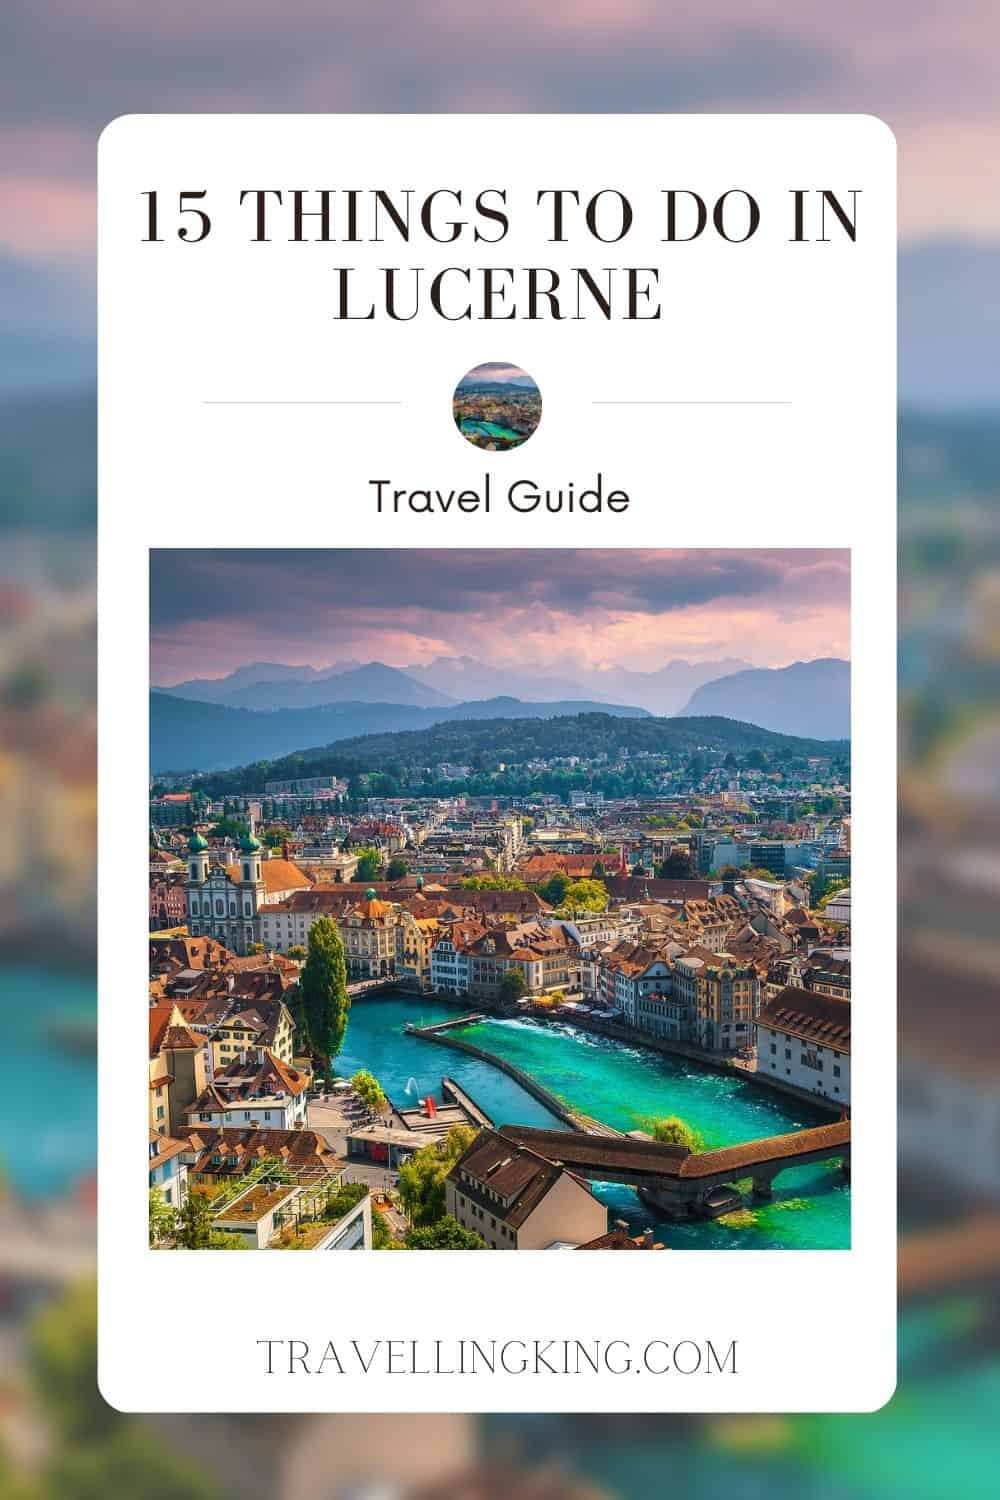 15 things to do in Lucerne